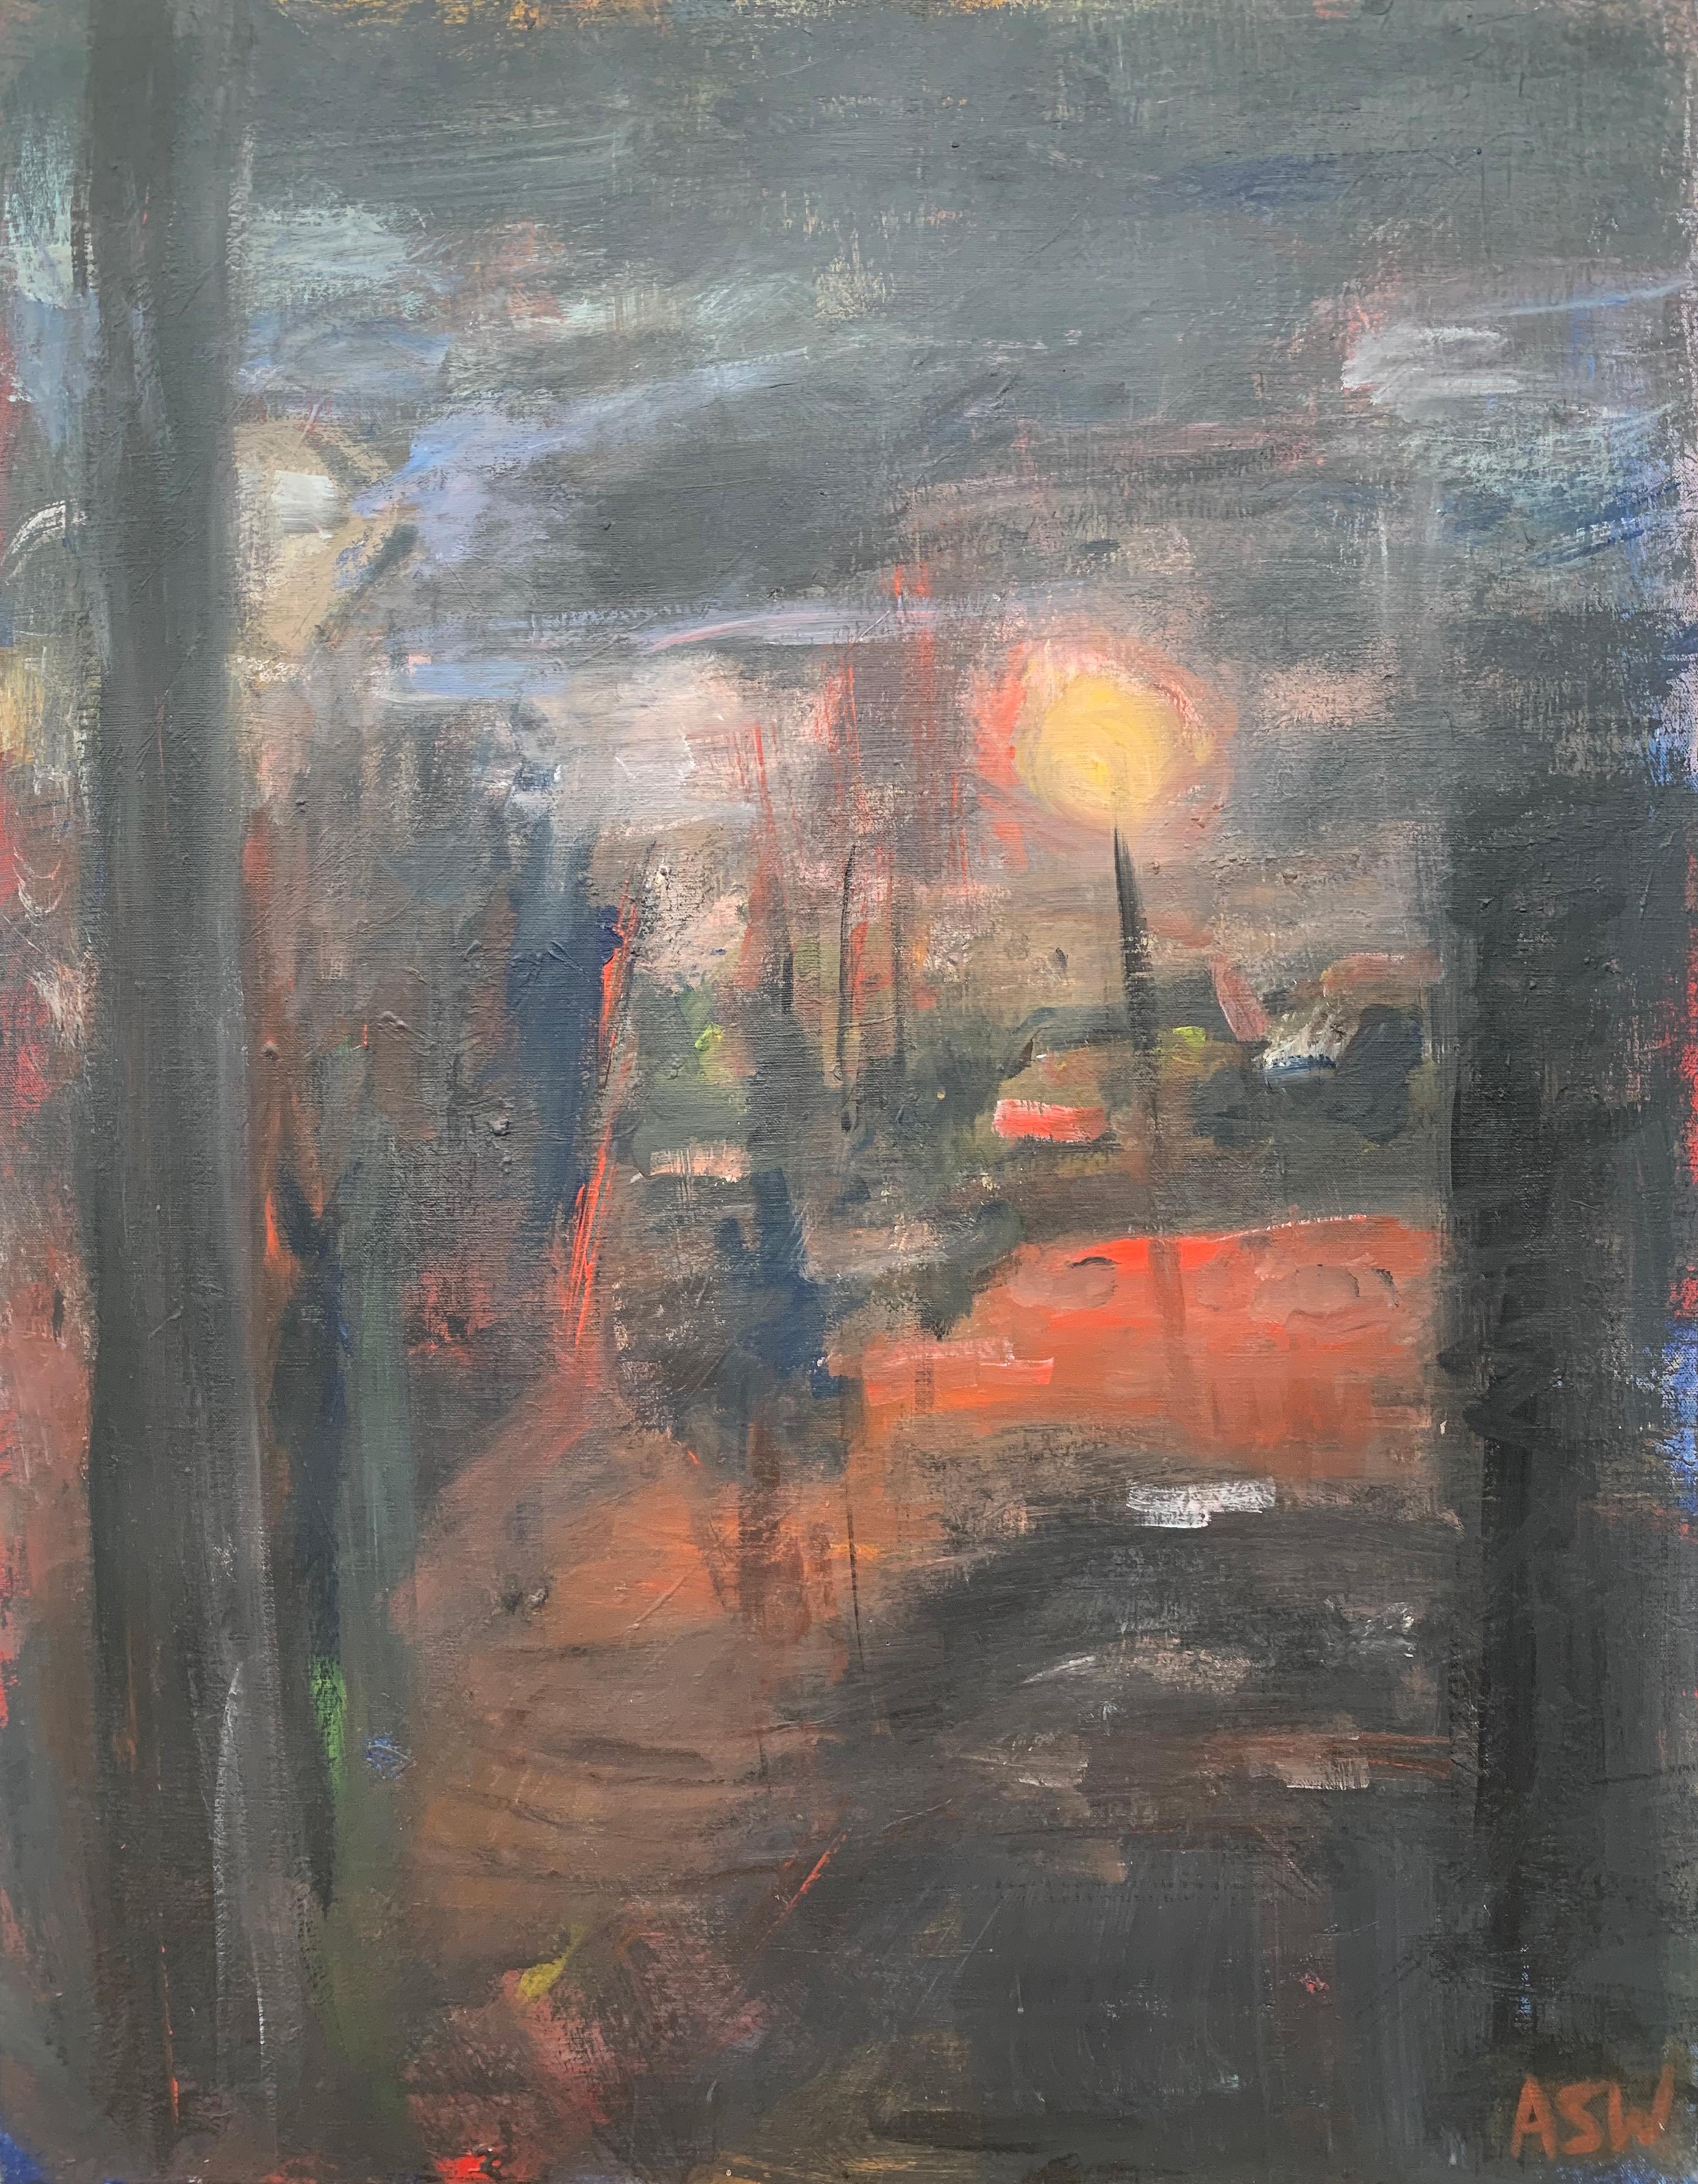 Dark & Atmospheric Abstract Expressionist Art by Contemporary British Painter For Sale 1